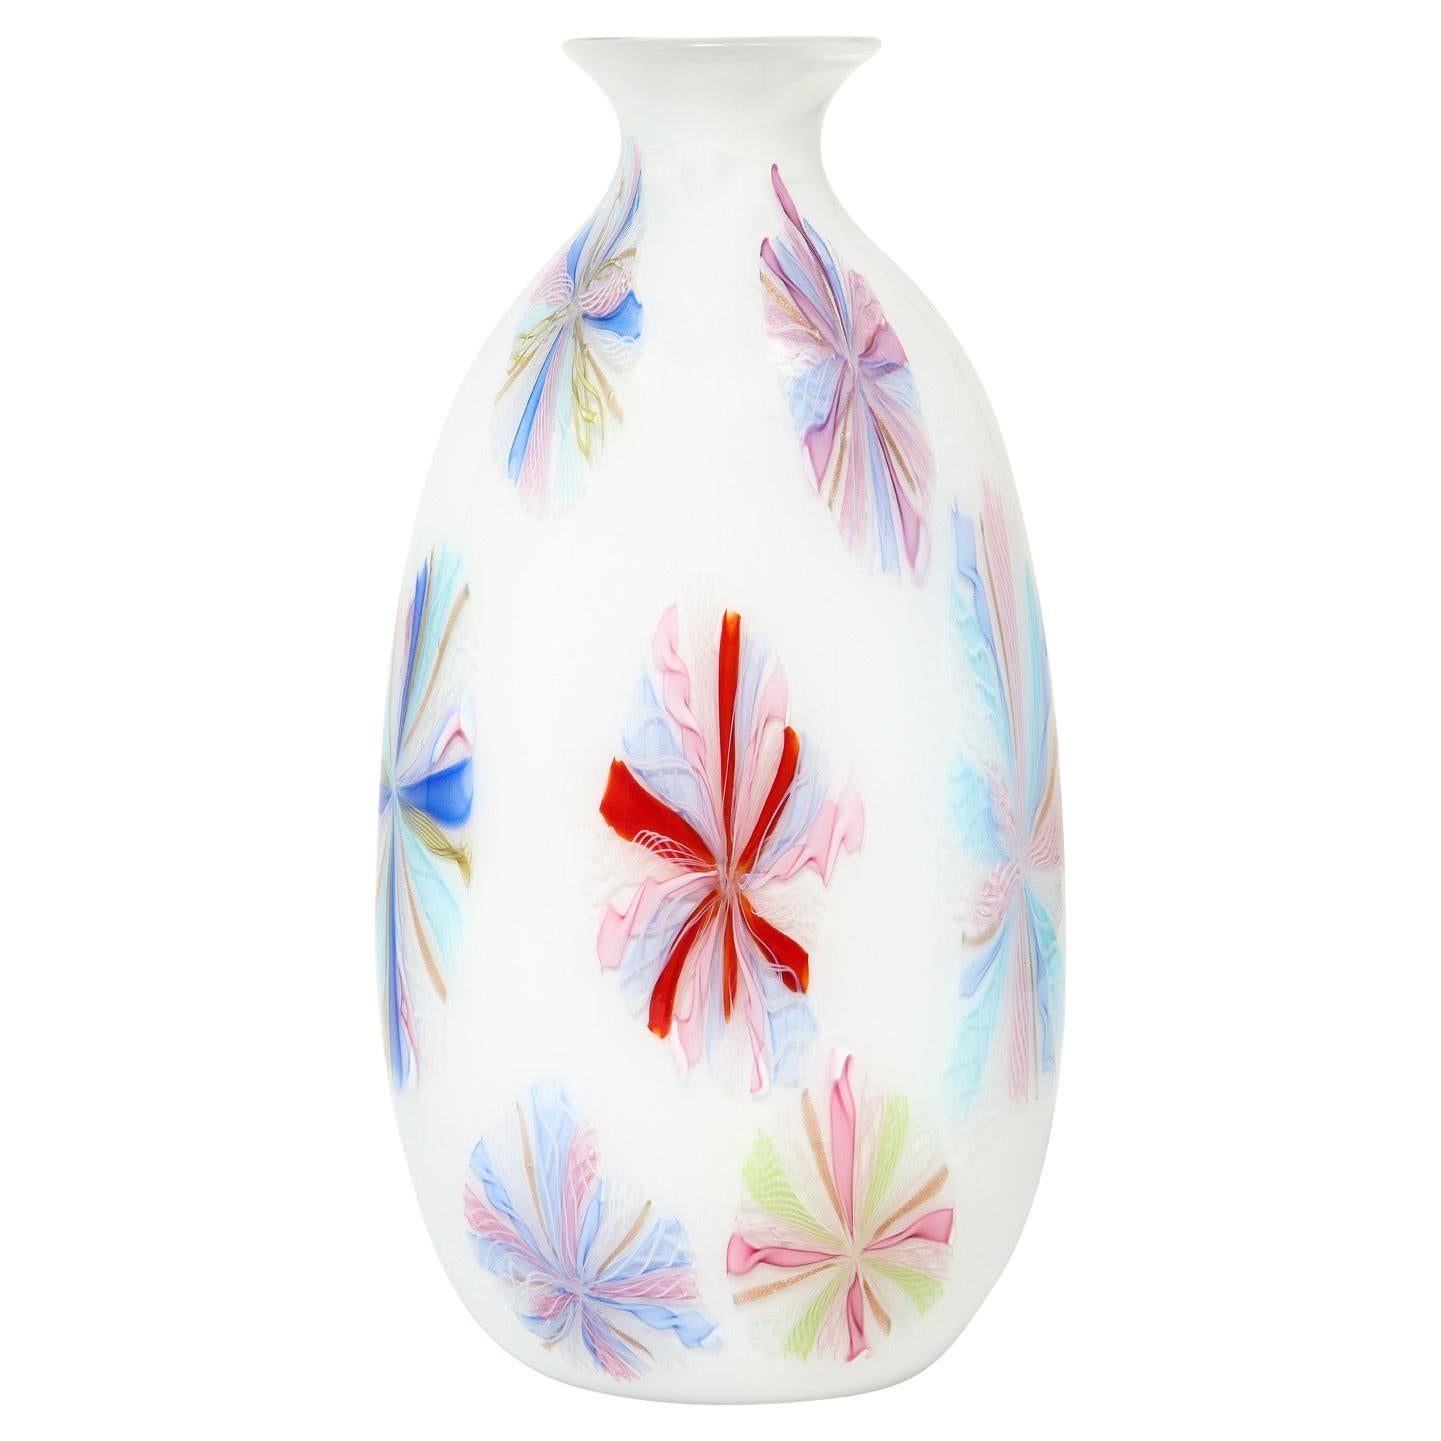 A.V.E.M. Hand Blown Glass Vase with Colorful Starburst Murrhines, 1950s For Sale